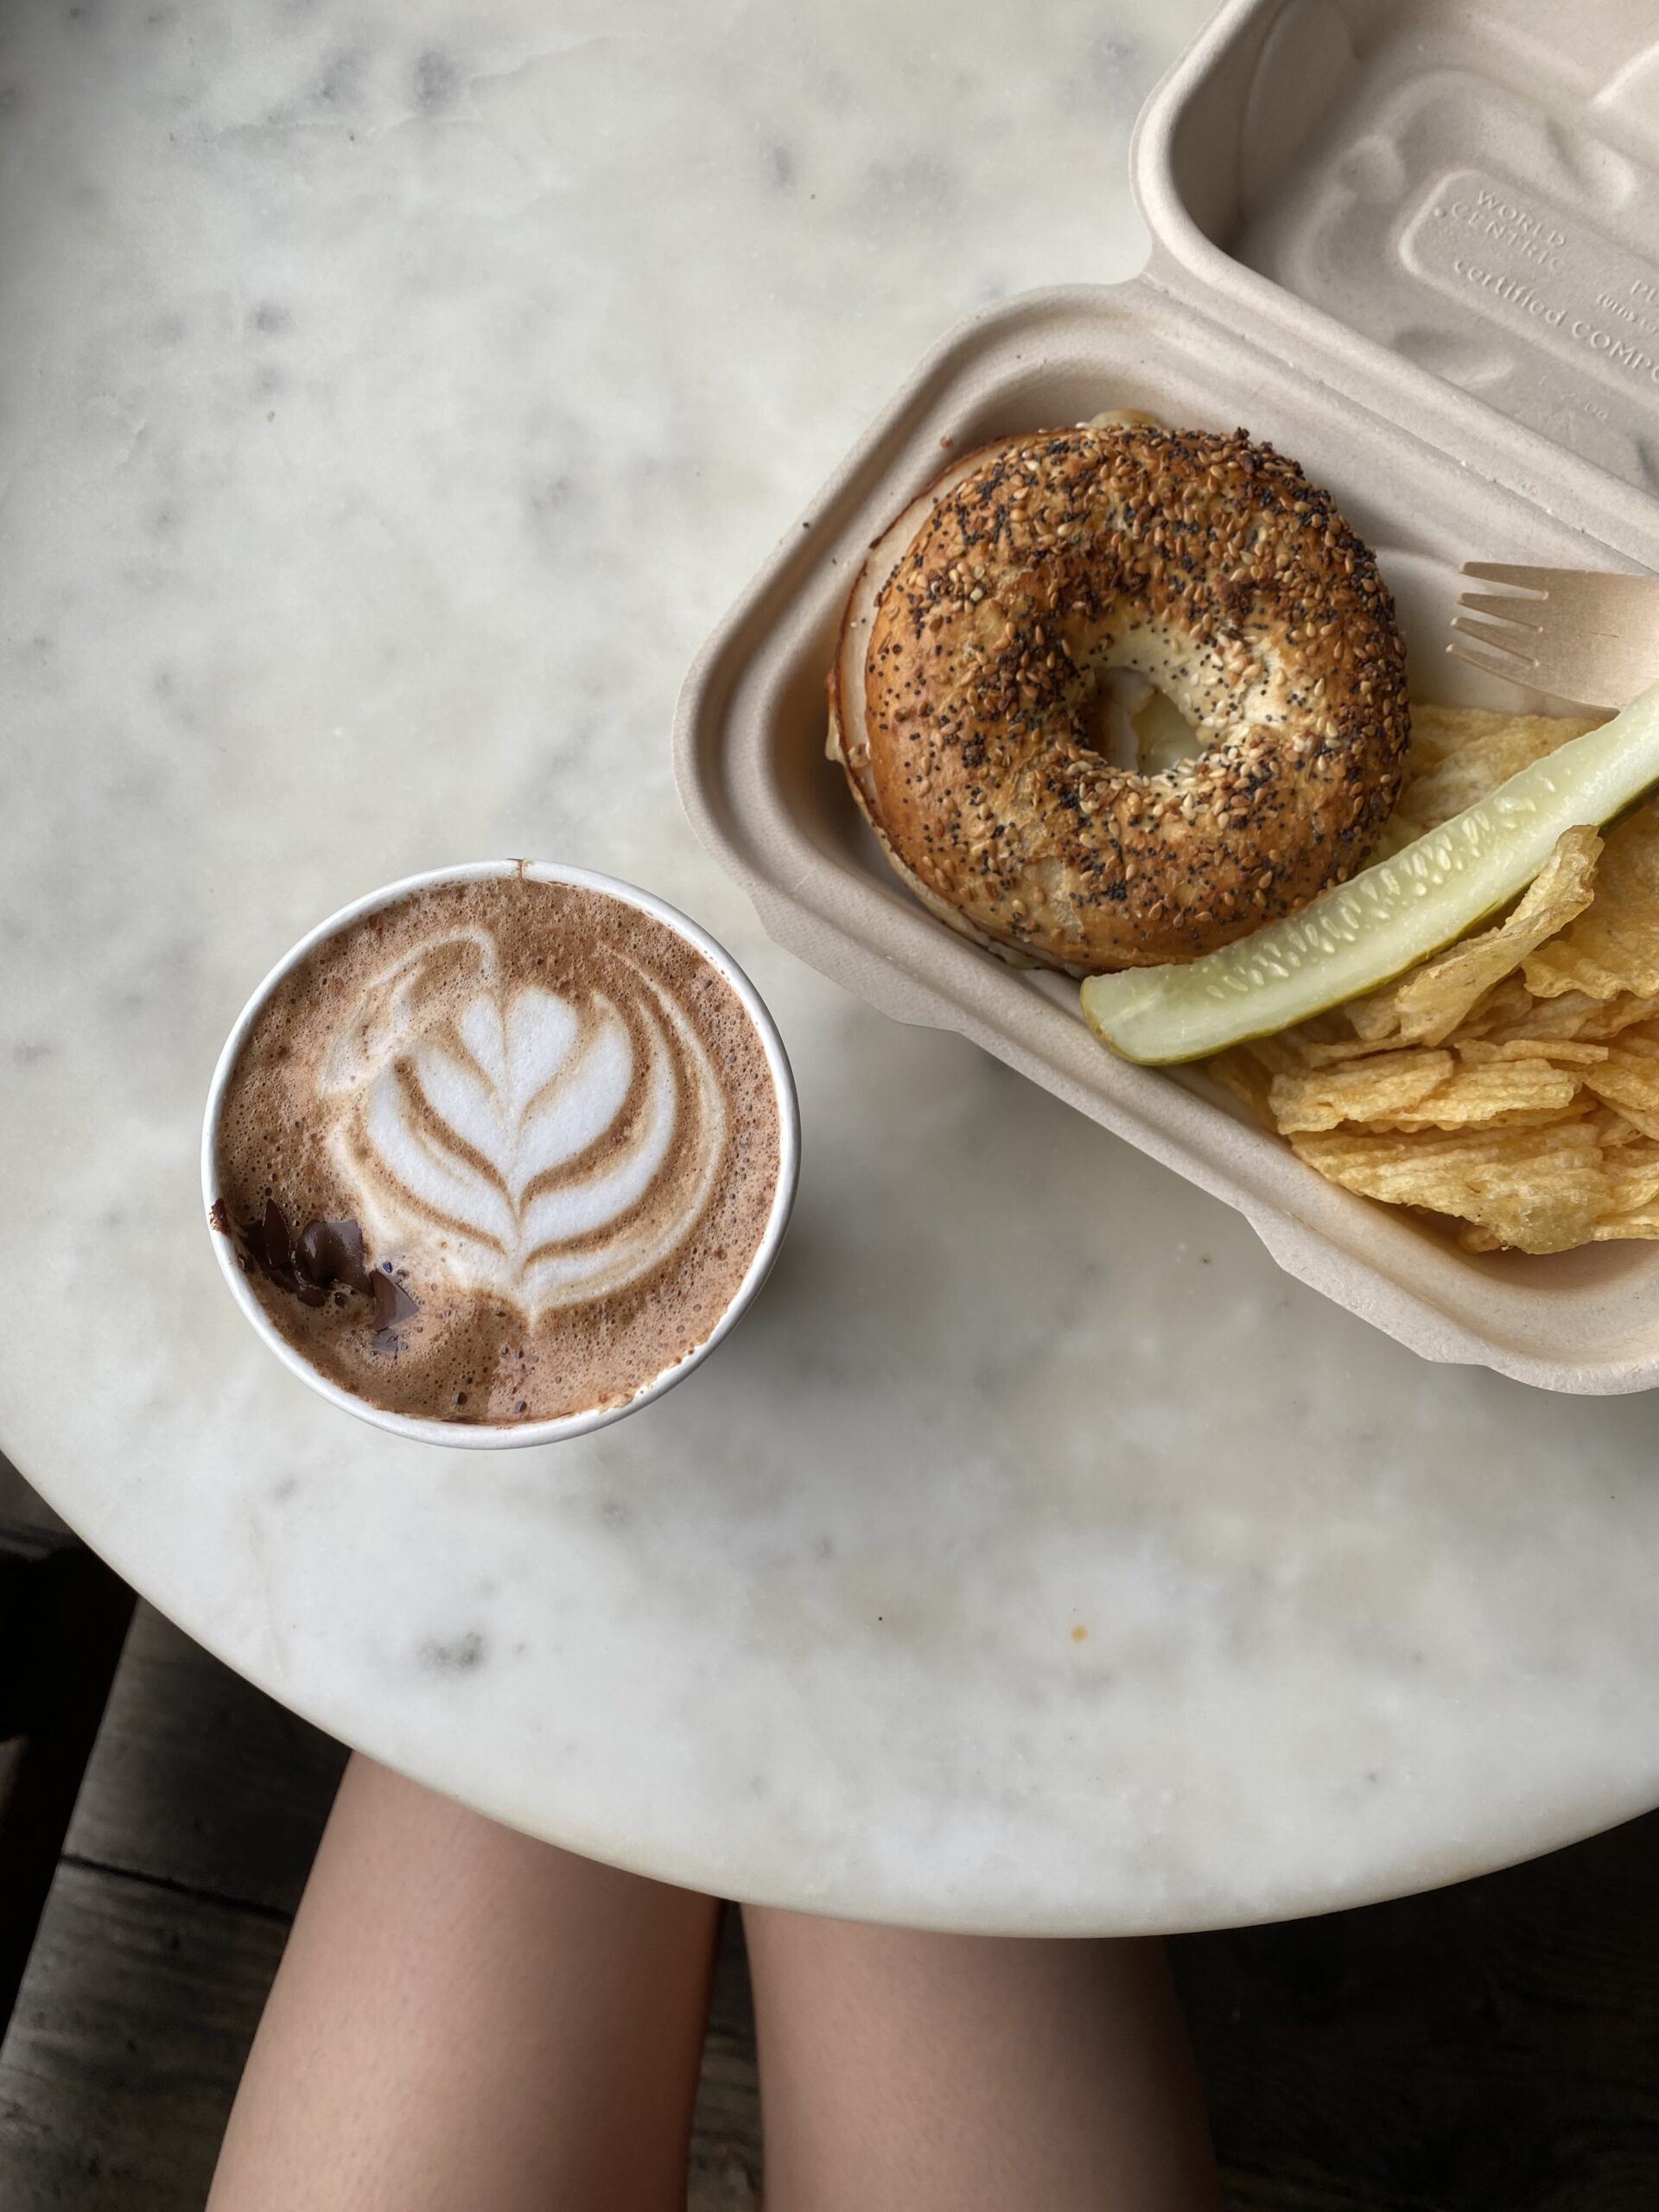 A delightful Chocolate Mayan Mocha, bagel, pickle, and ruffled potato chips neatly set on a white marble table.